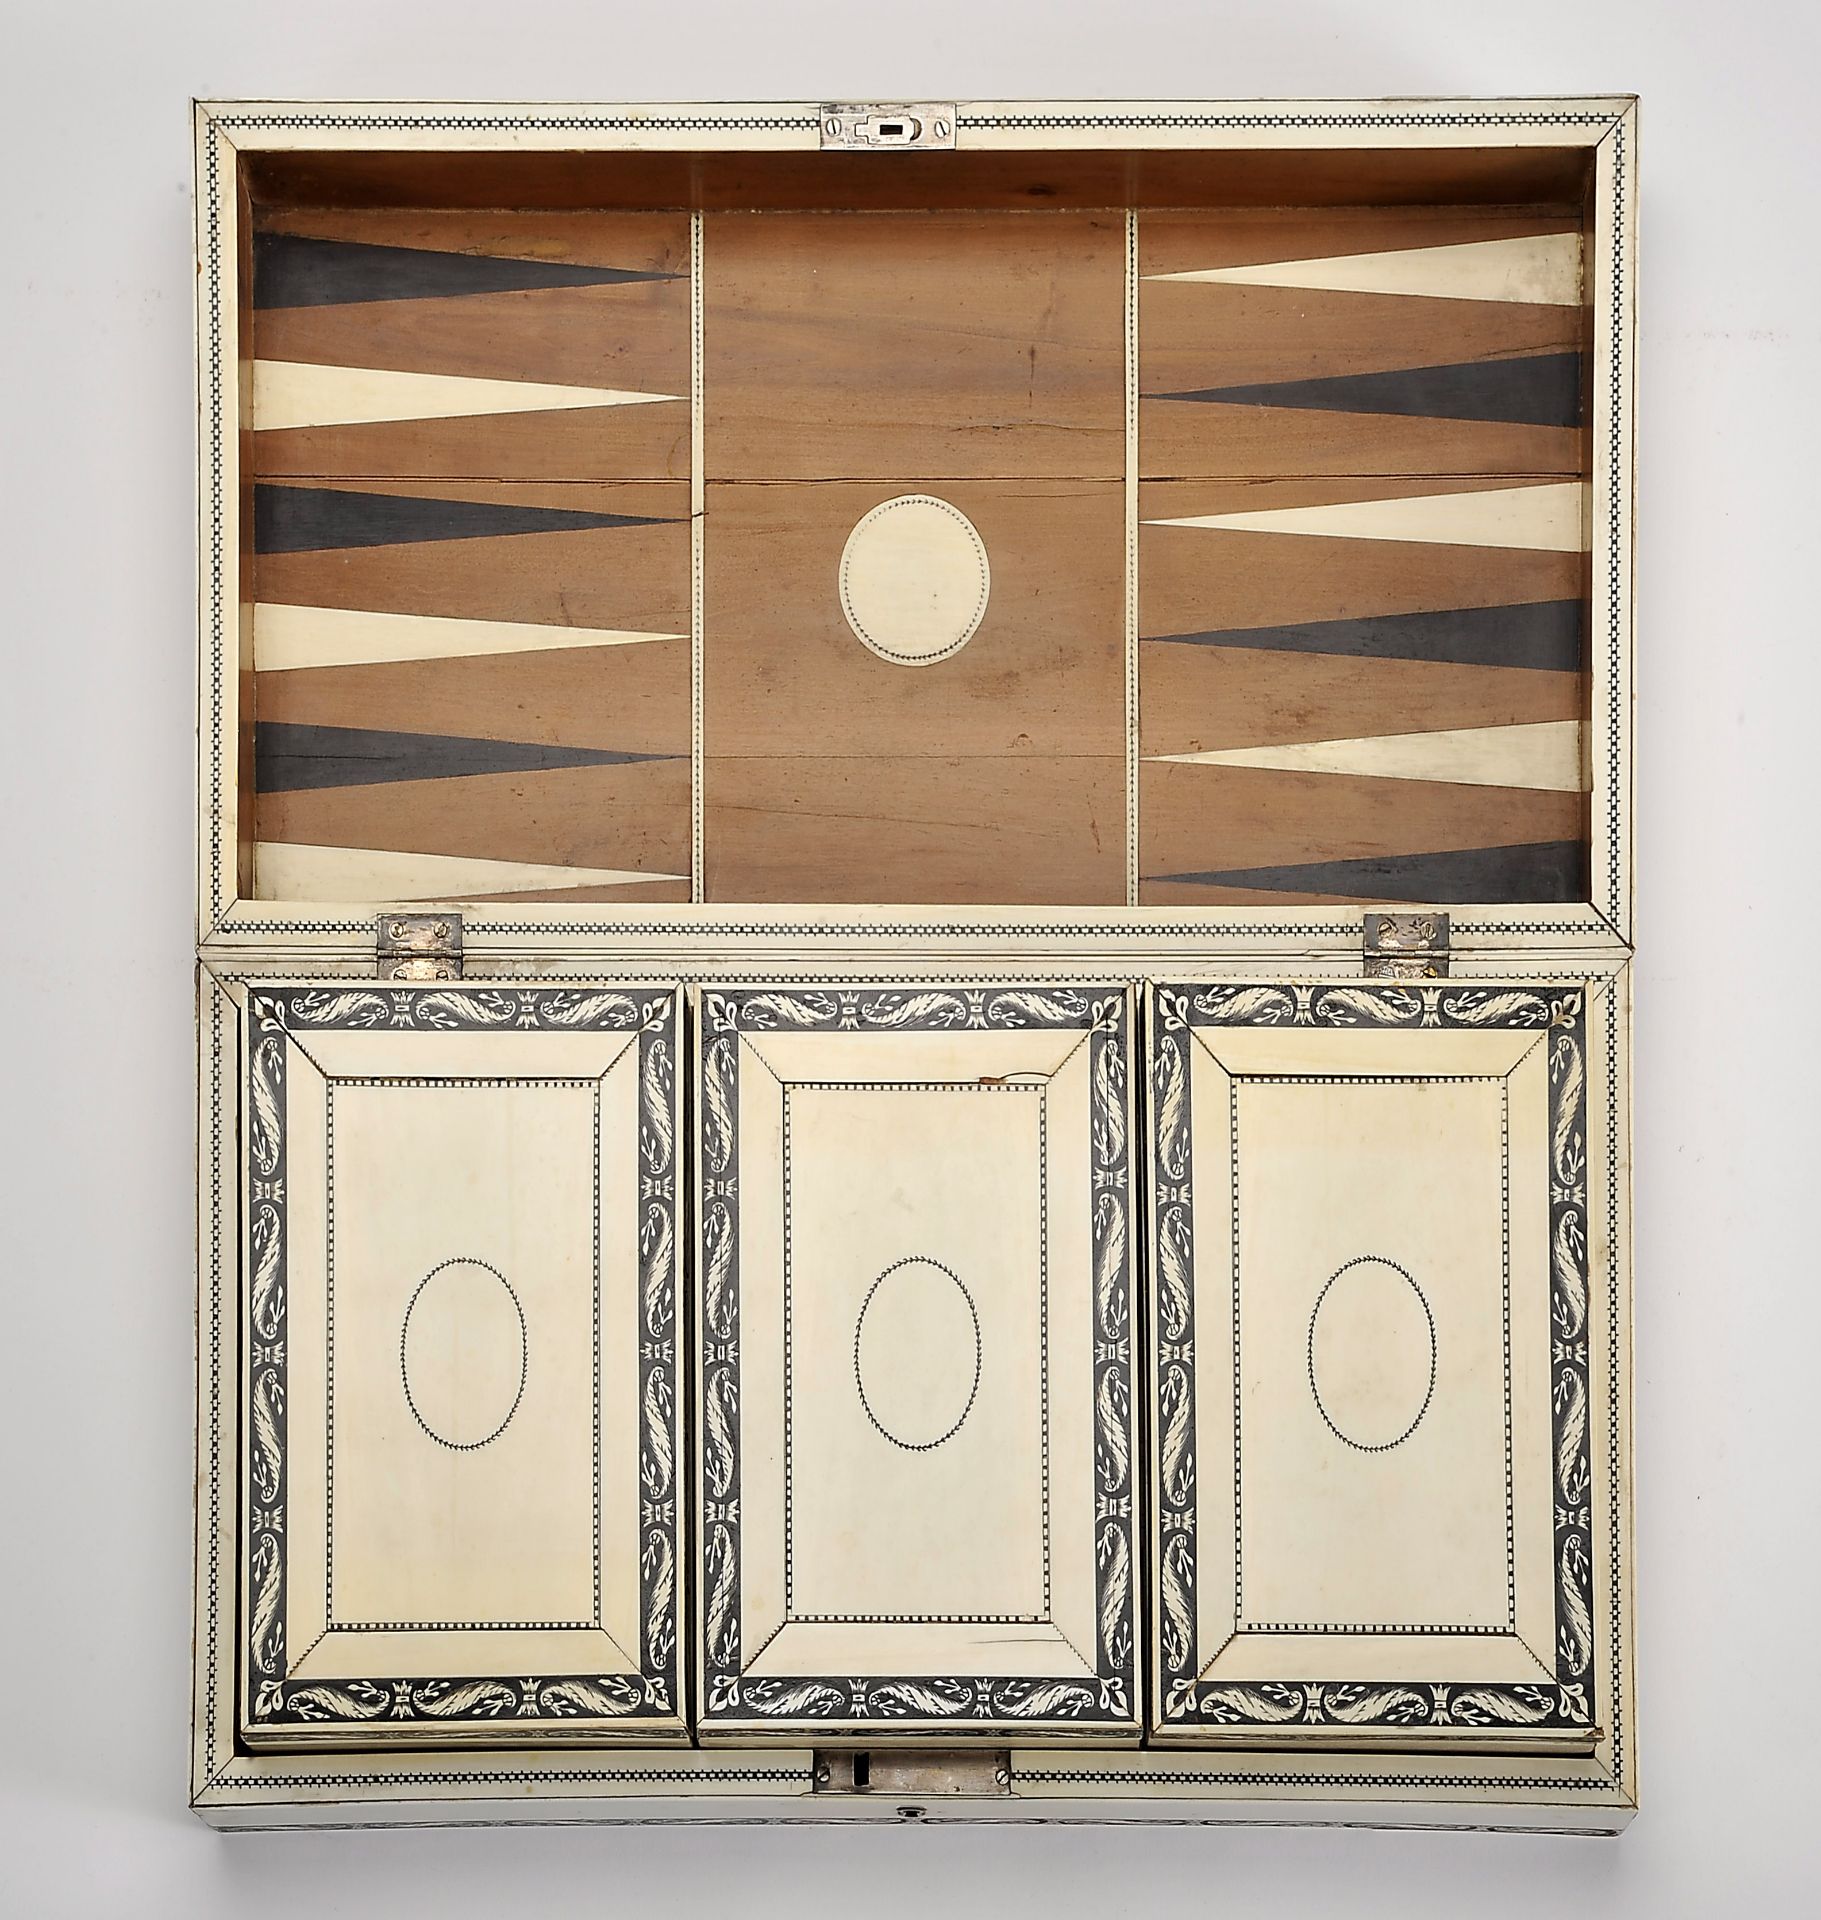 Chess and Backgammon pieces with an articulated board closing in the form of a box - Image 6 of 13